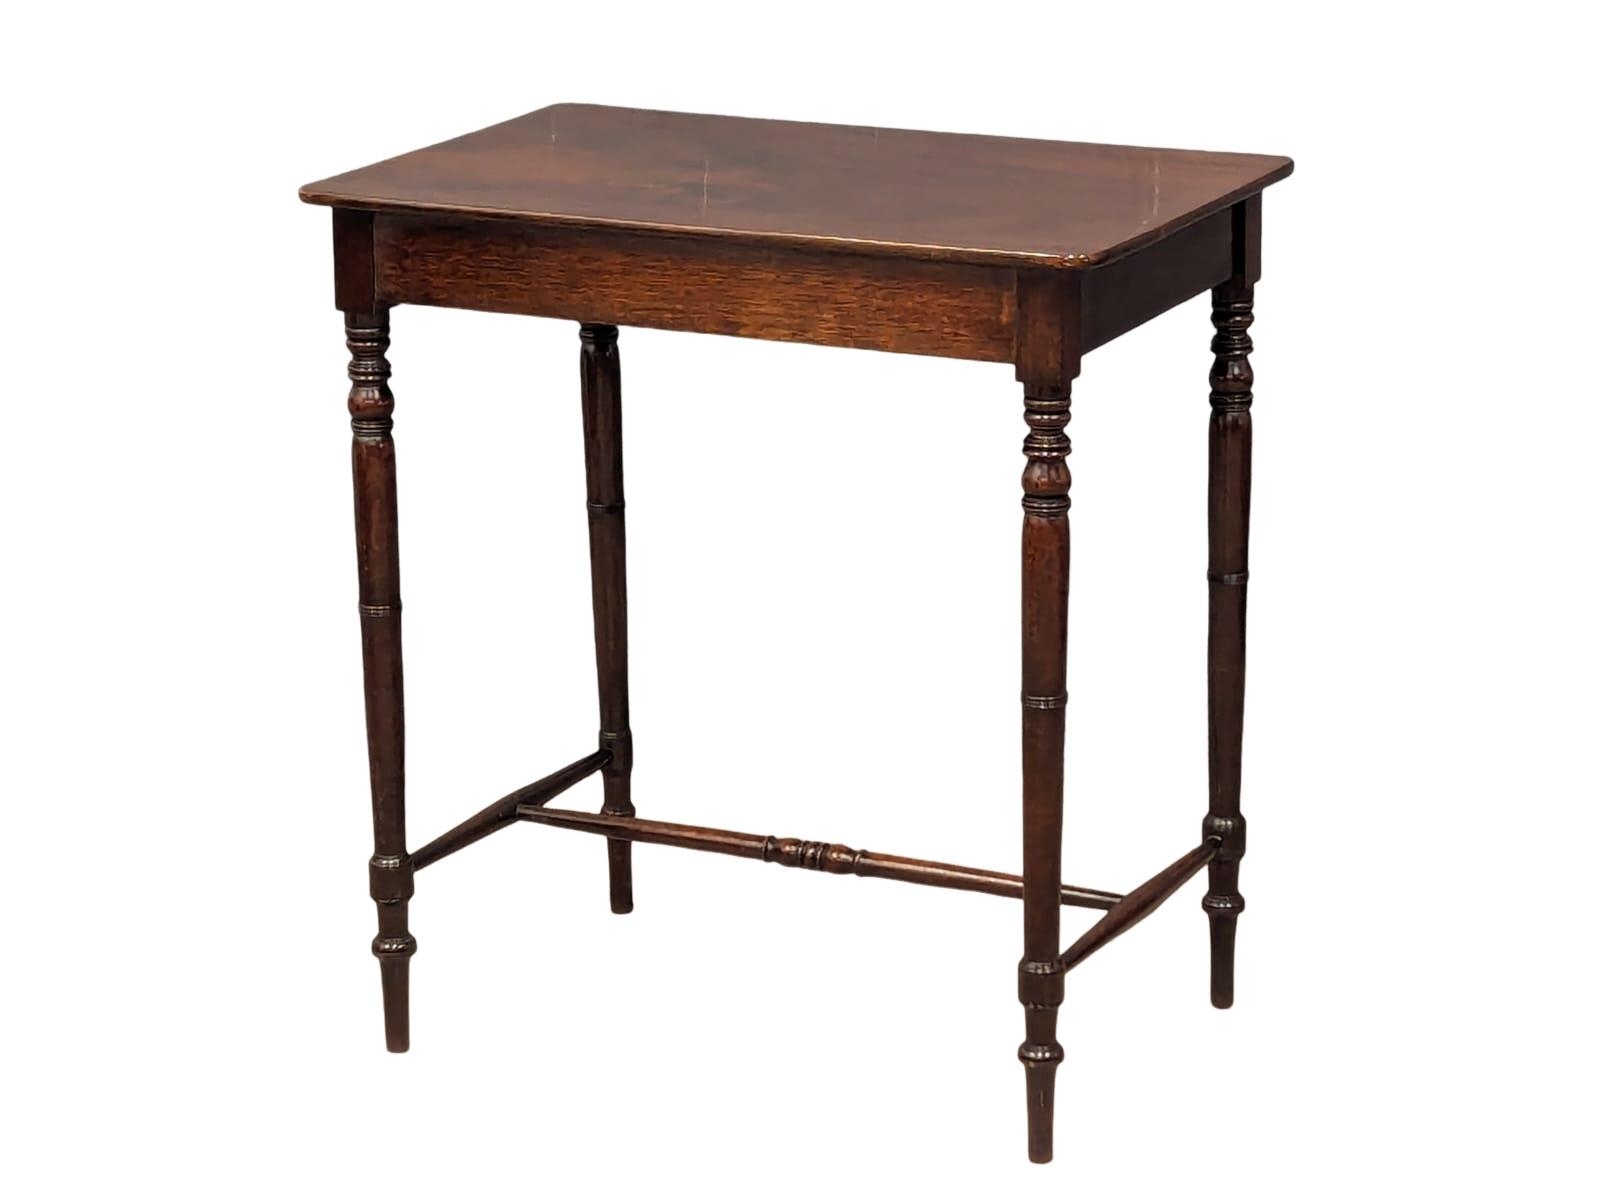 A William IV mahogany side table with turned supports and stretcher. Circa 1830-1835. 70x44x74cm